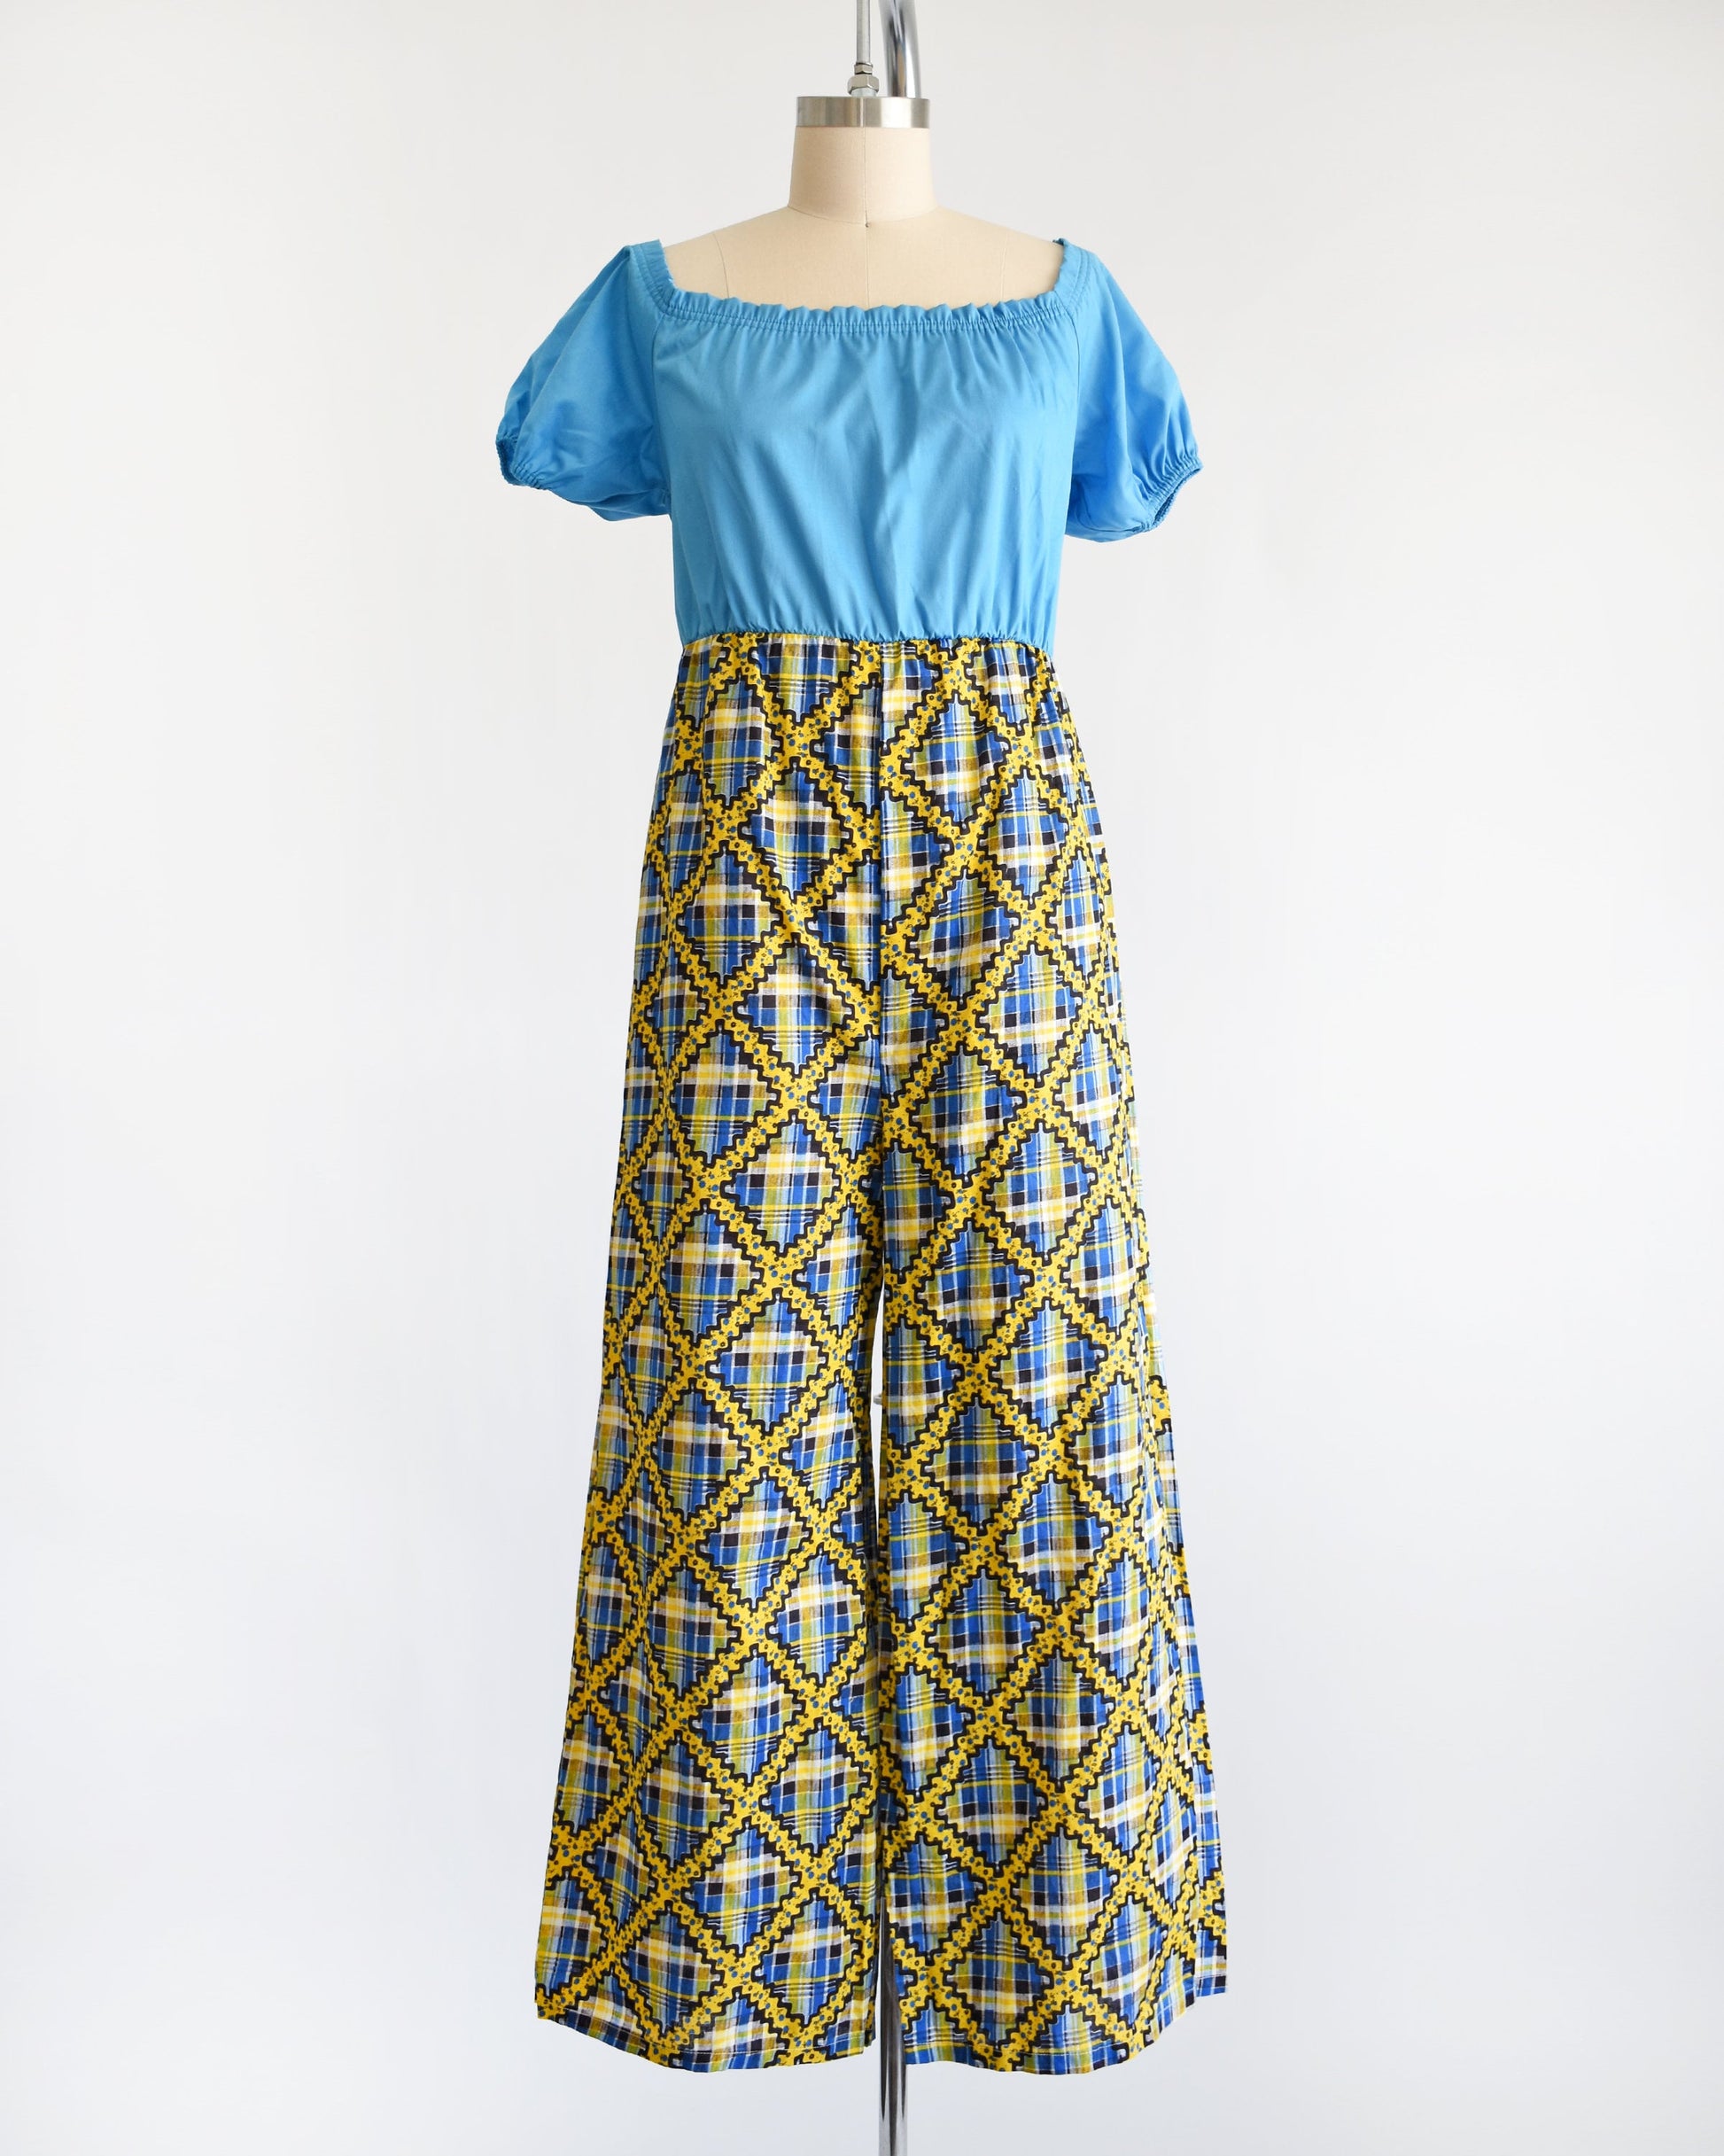 A vintage 70s jumpsuit that has a blue bodice with smocked elastic neckline and puff sleeves. The pants are a blue, black, and yellow plaid, with a ric-rac dotted yellow and black print on top of the plaid.